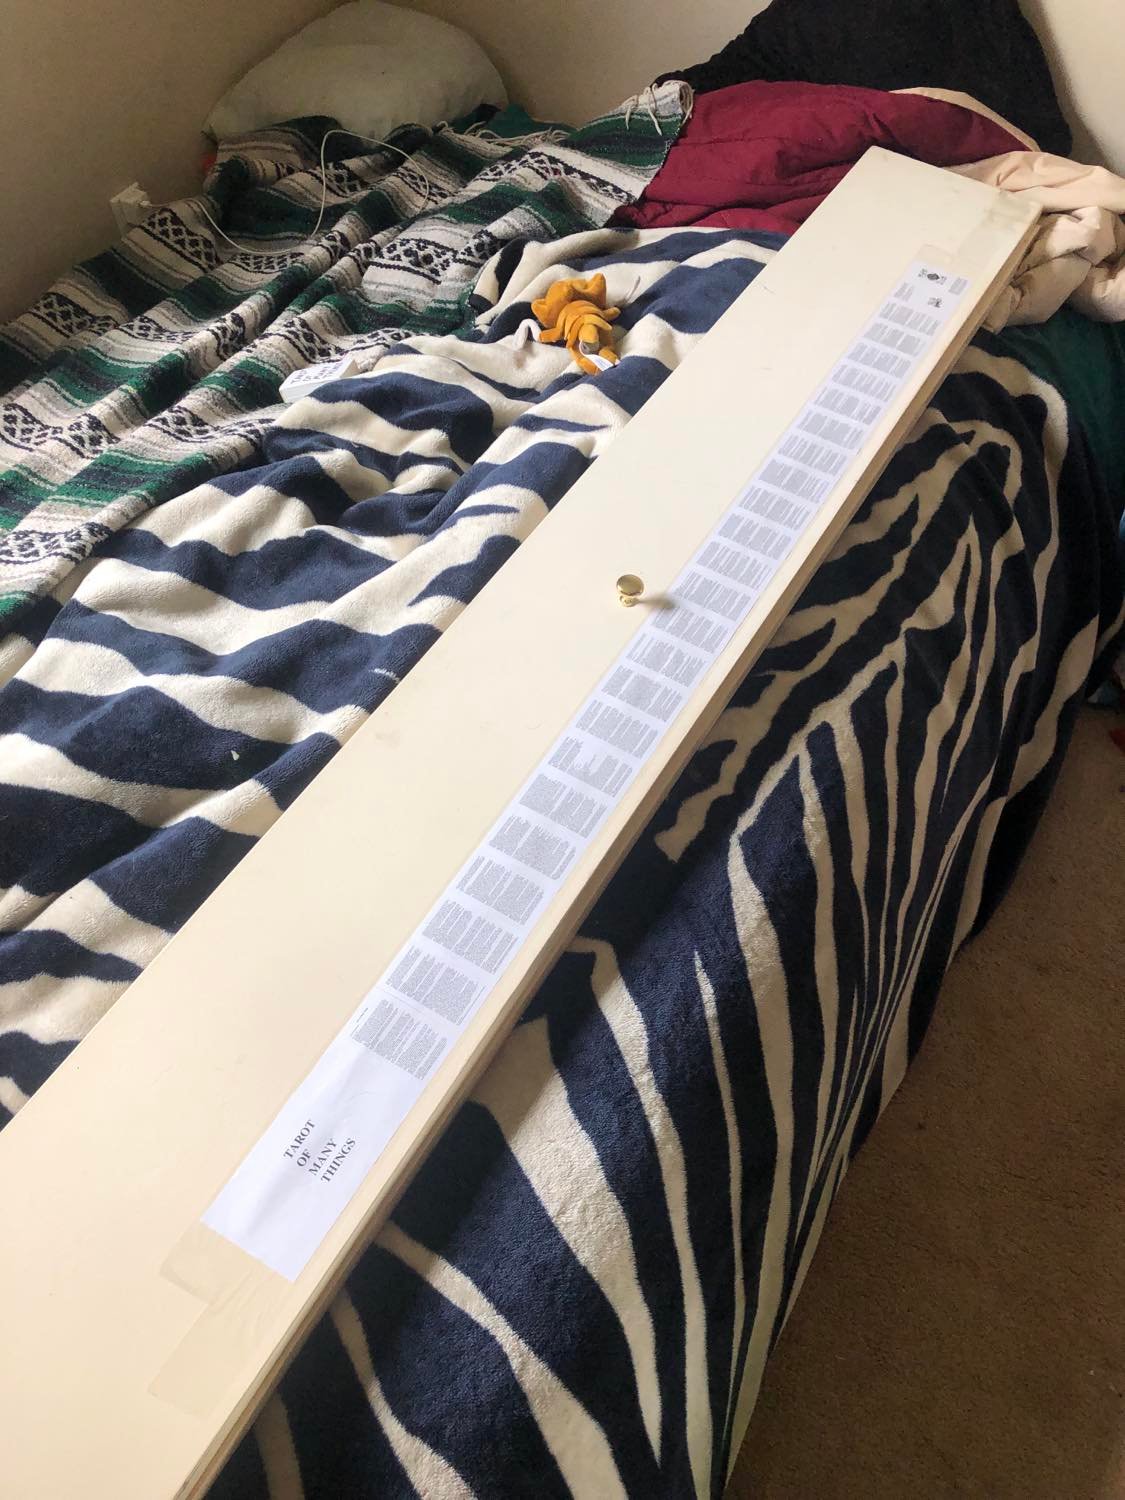 The better method, sticky-side-up tape layed across a long board, and held taut on either side, and all of the pages of the book are attached to the tape. The board in question here is a closet door, read below for details. It's sitting on a zebra-print blanket, on a bed. A Kabutops doll is kinda crawling around on the bed.